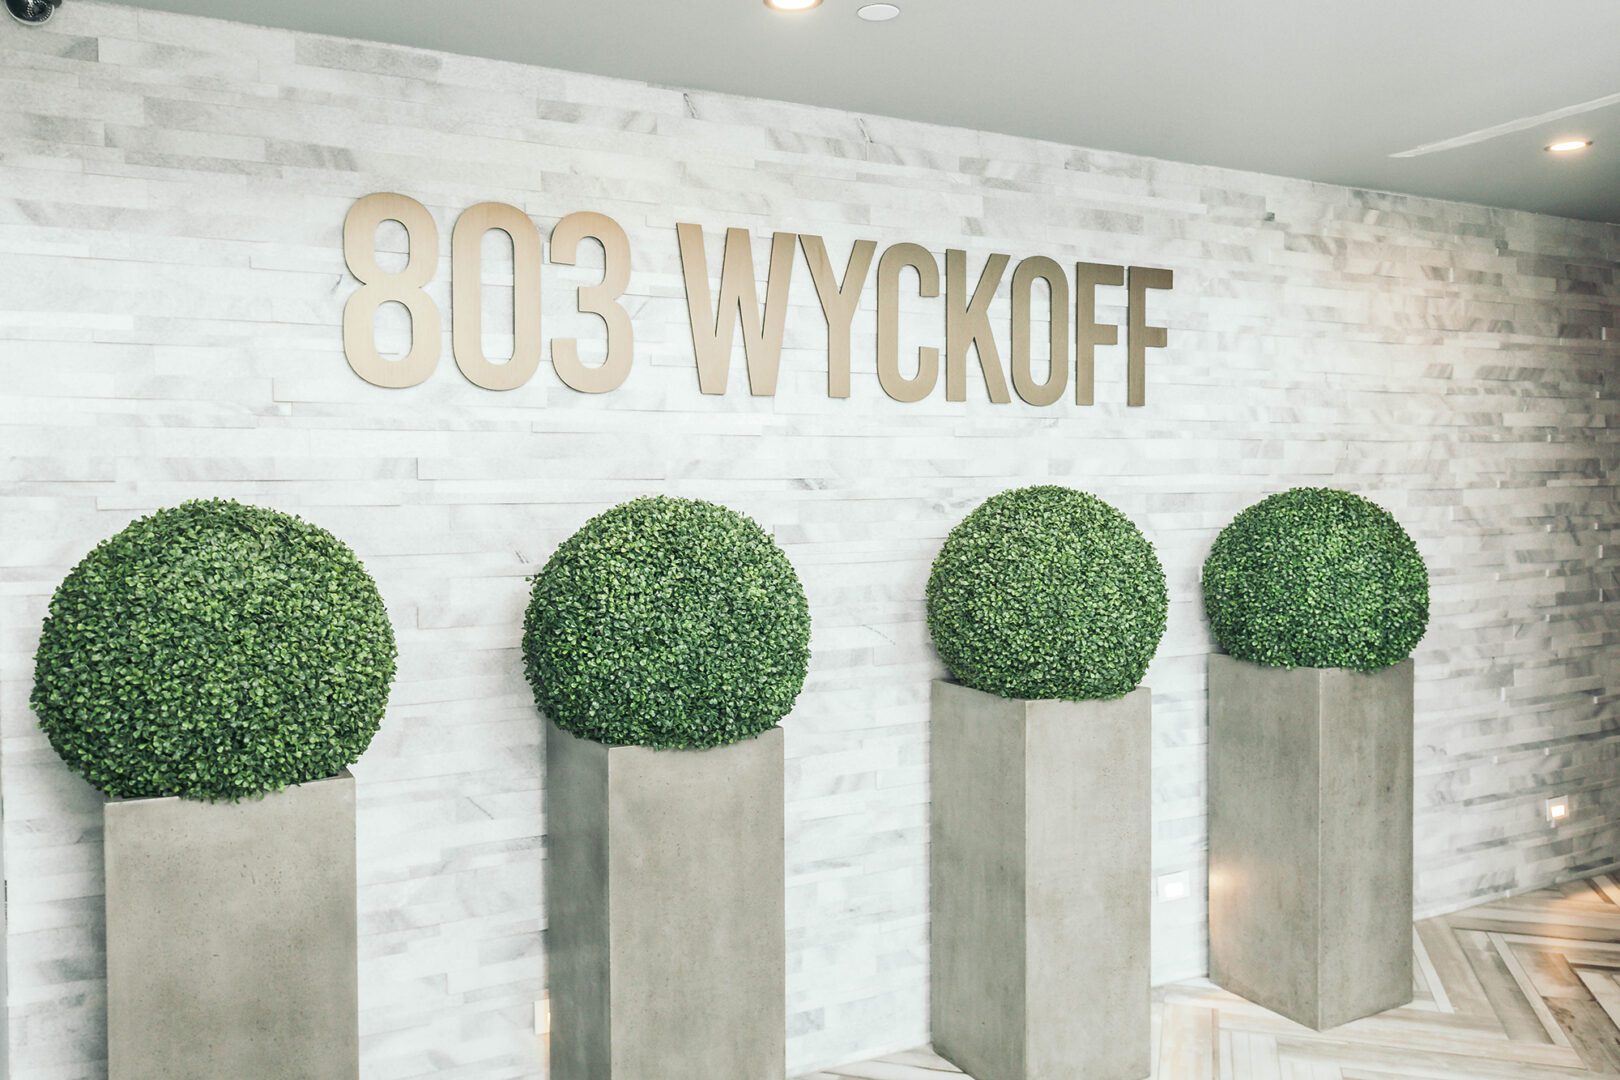 A wall with four bushes and the words " 8 0 3 wyckoff ".